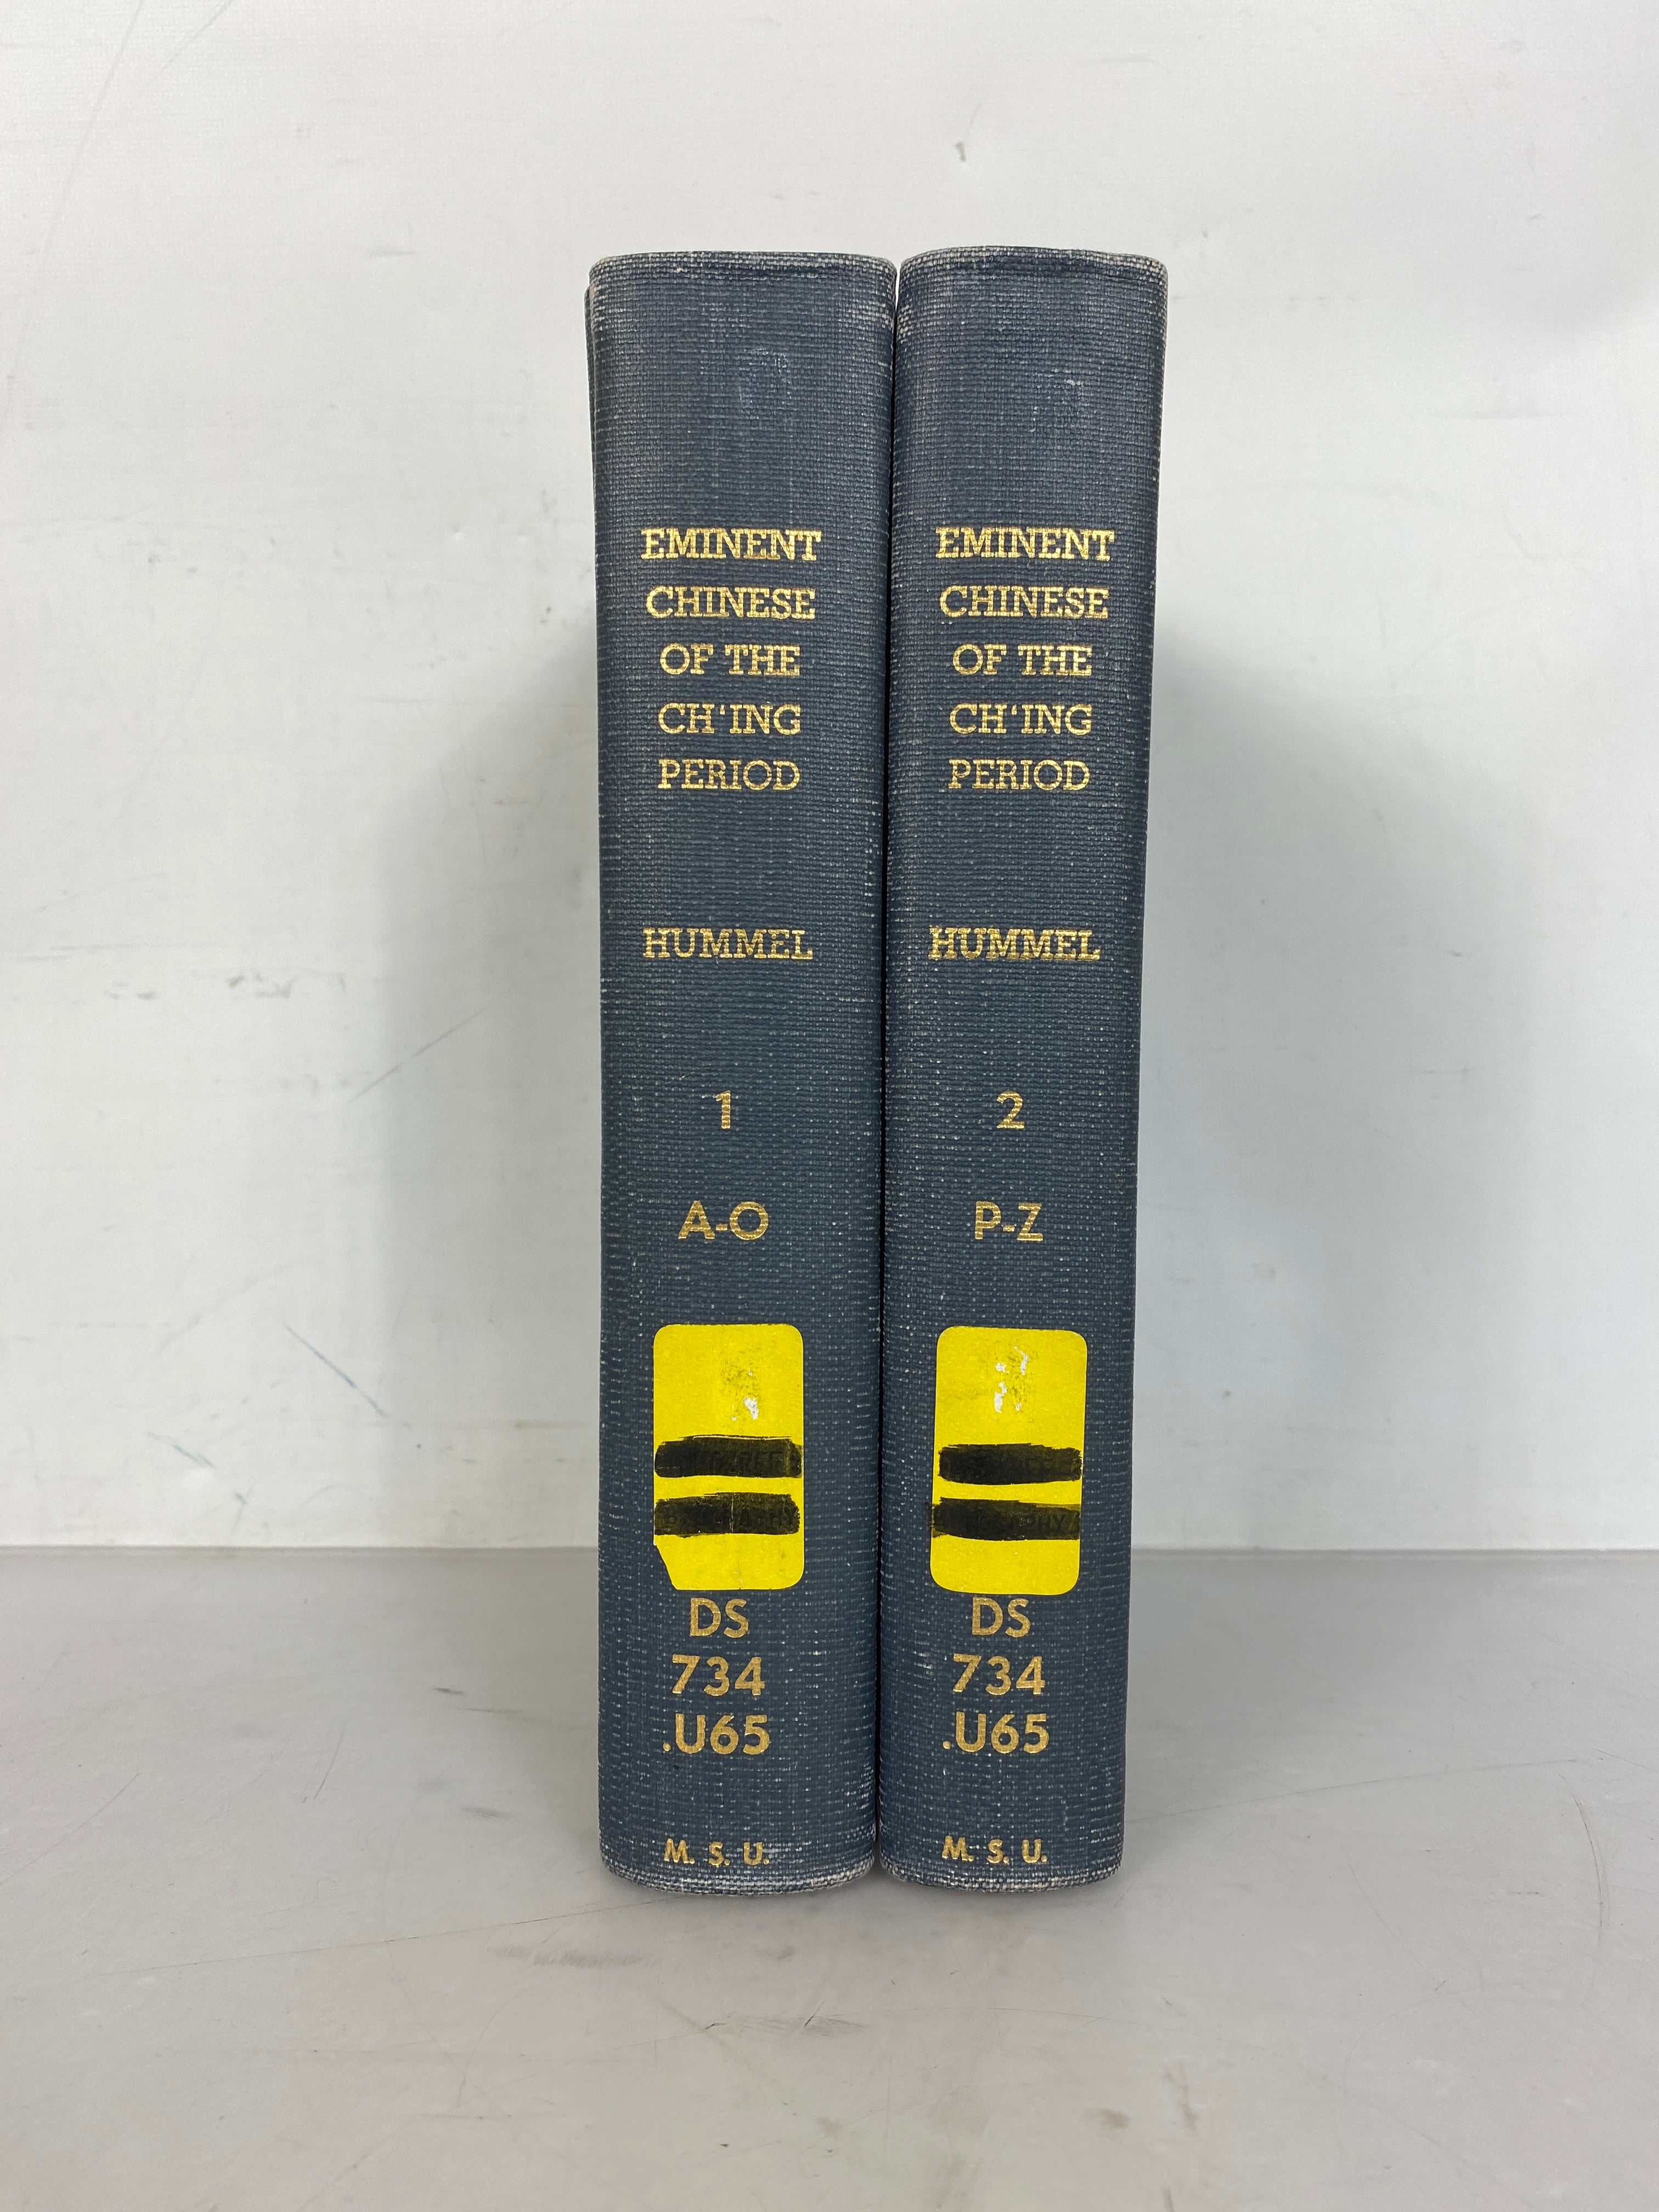 2 Volume Set Eminent Chinese of the Ch'Ing Period (1644-1912) 1943 US Government Printing Office HC